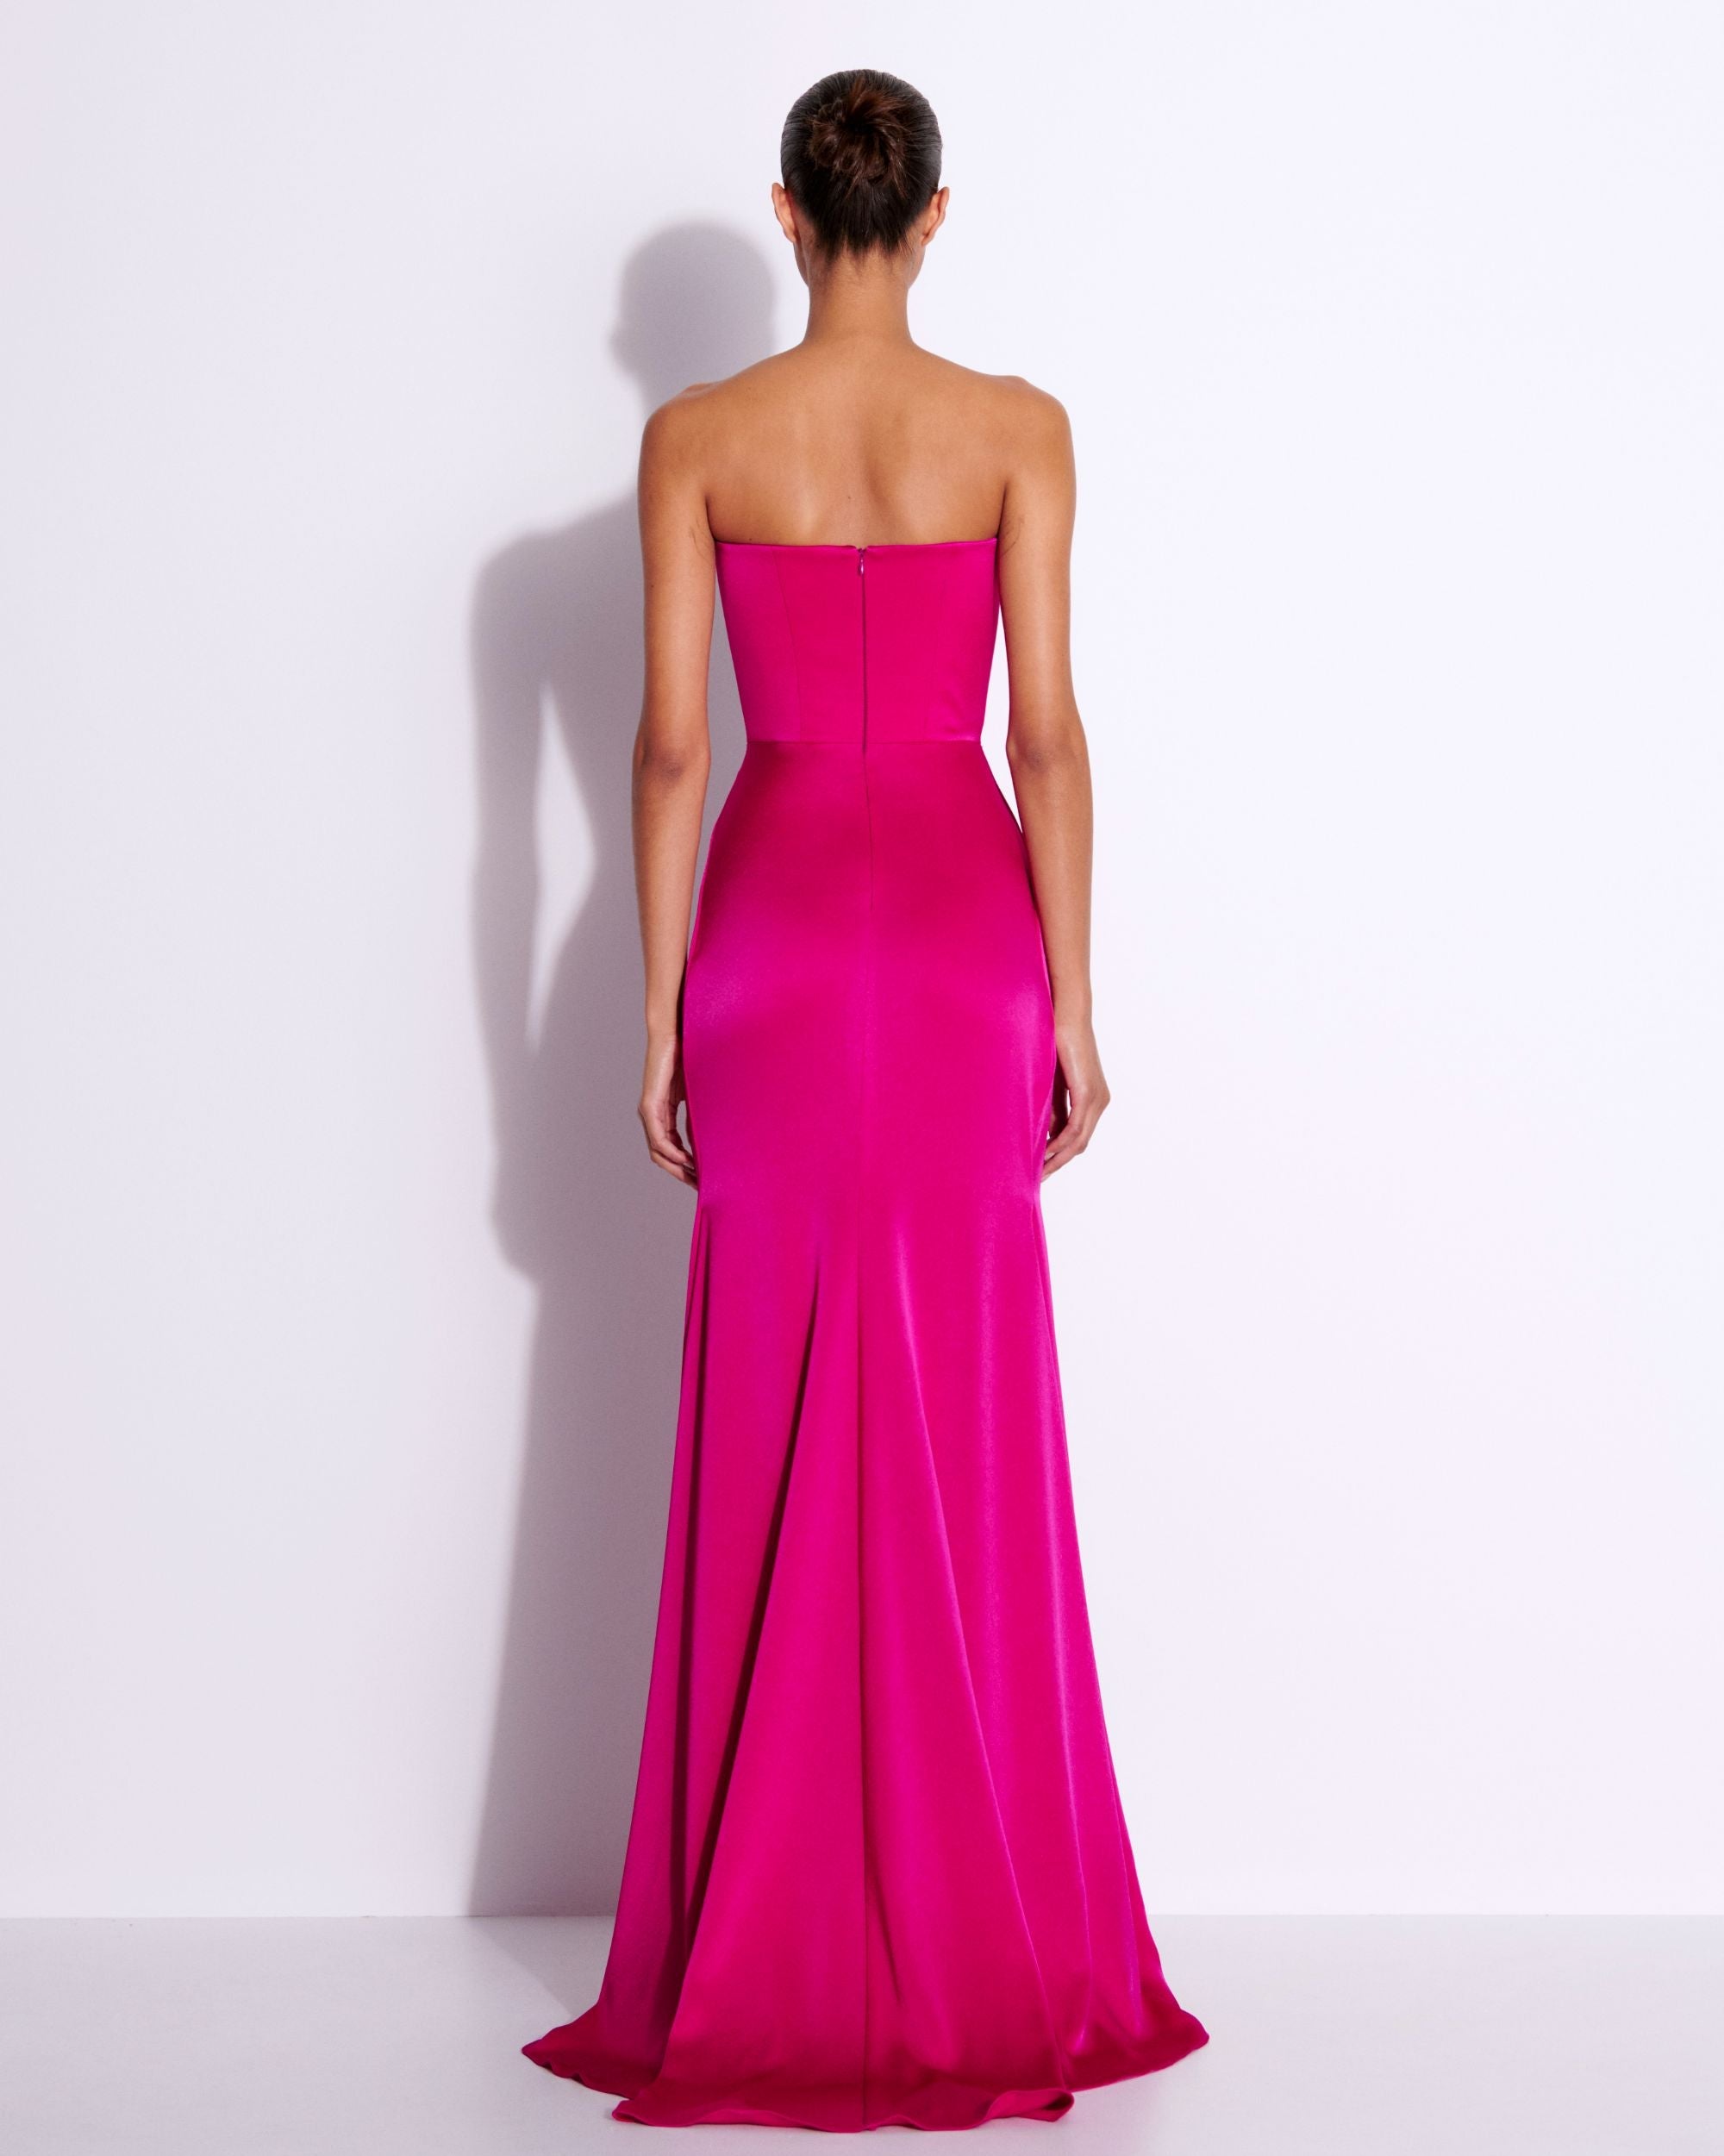 Strapless Gathered Drape Gown in Satin Crepe – Alex Perry